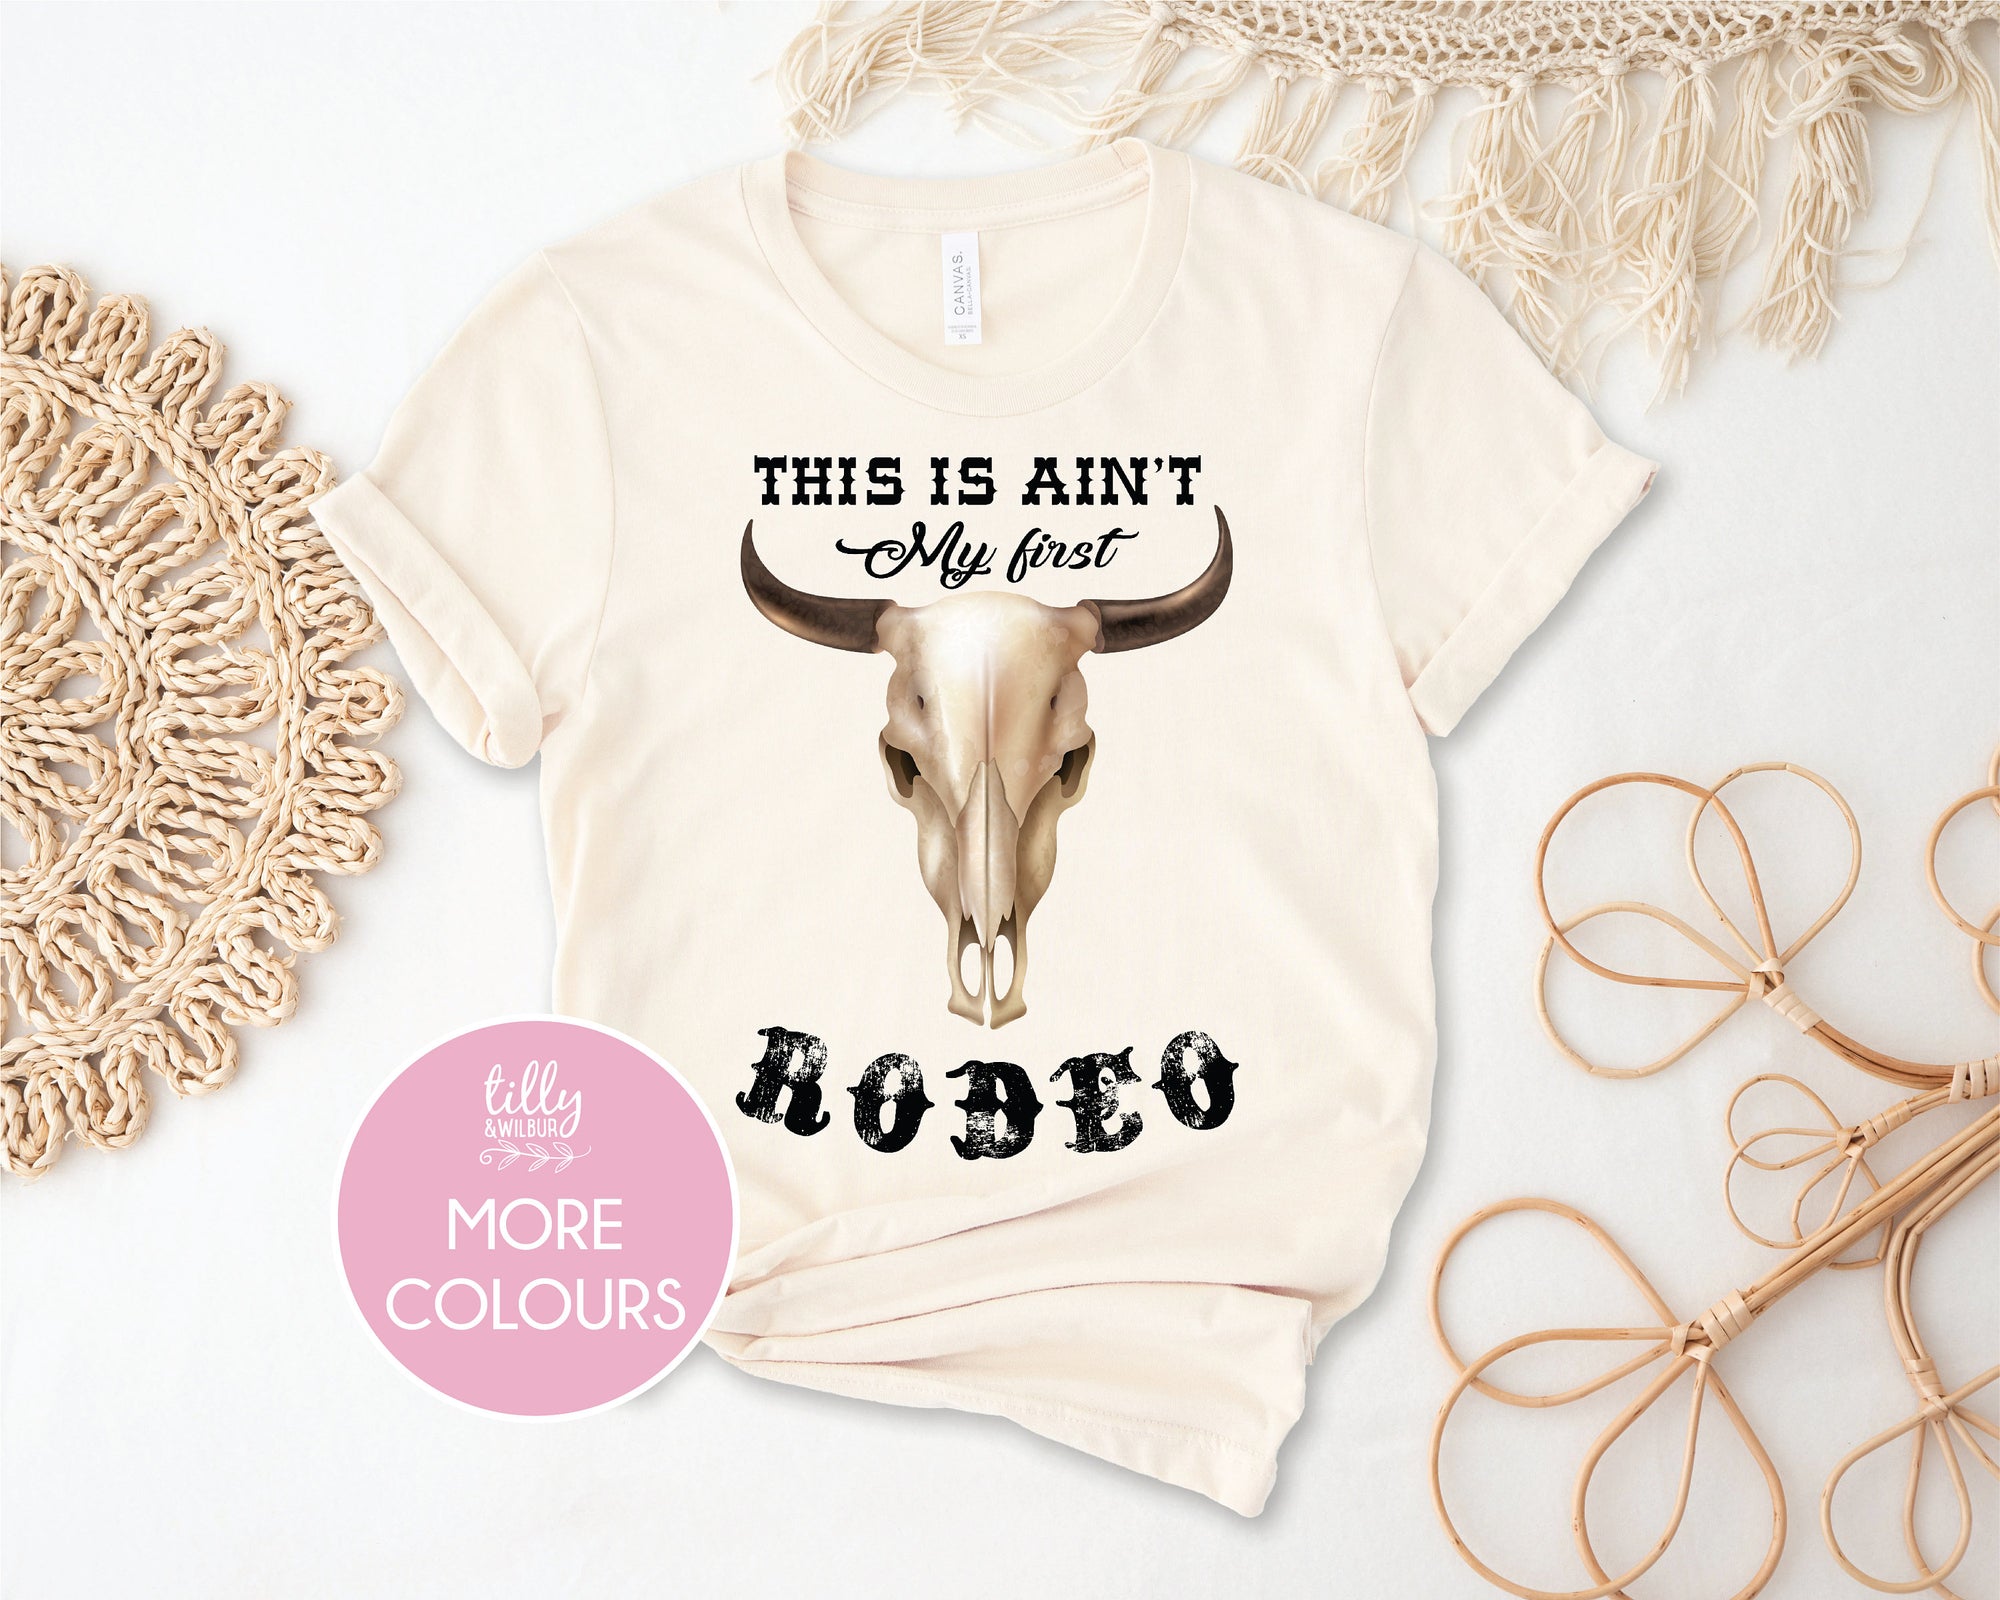 This Ain't My First Rodeo T-Shirt, Country Music T-Shirt, Rodeo T-Shirt, Sassy Country Girl T-Shirt, Country Music Festival T-Shirt, Cowgirl